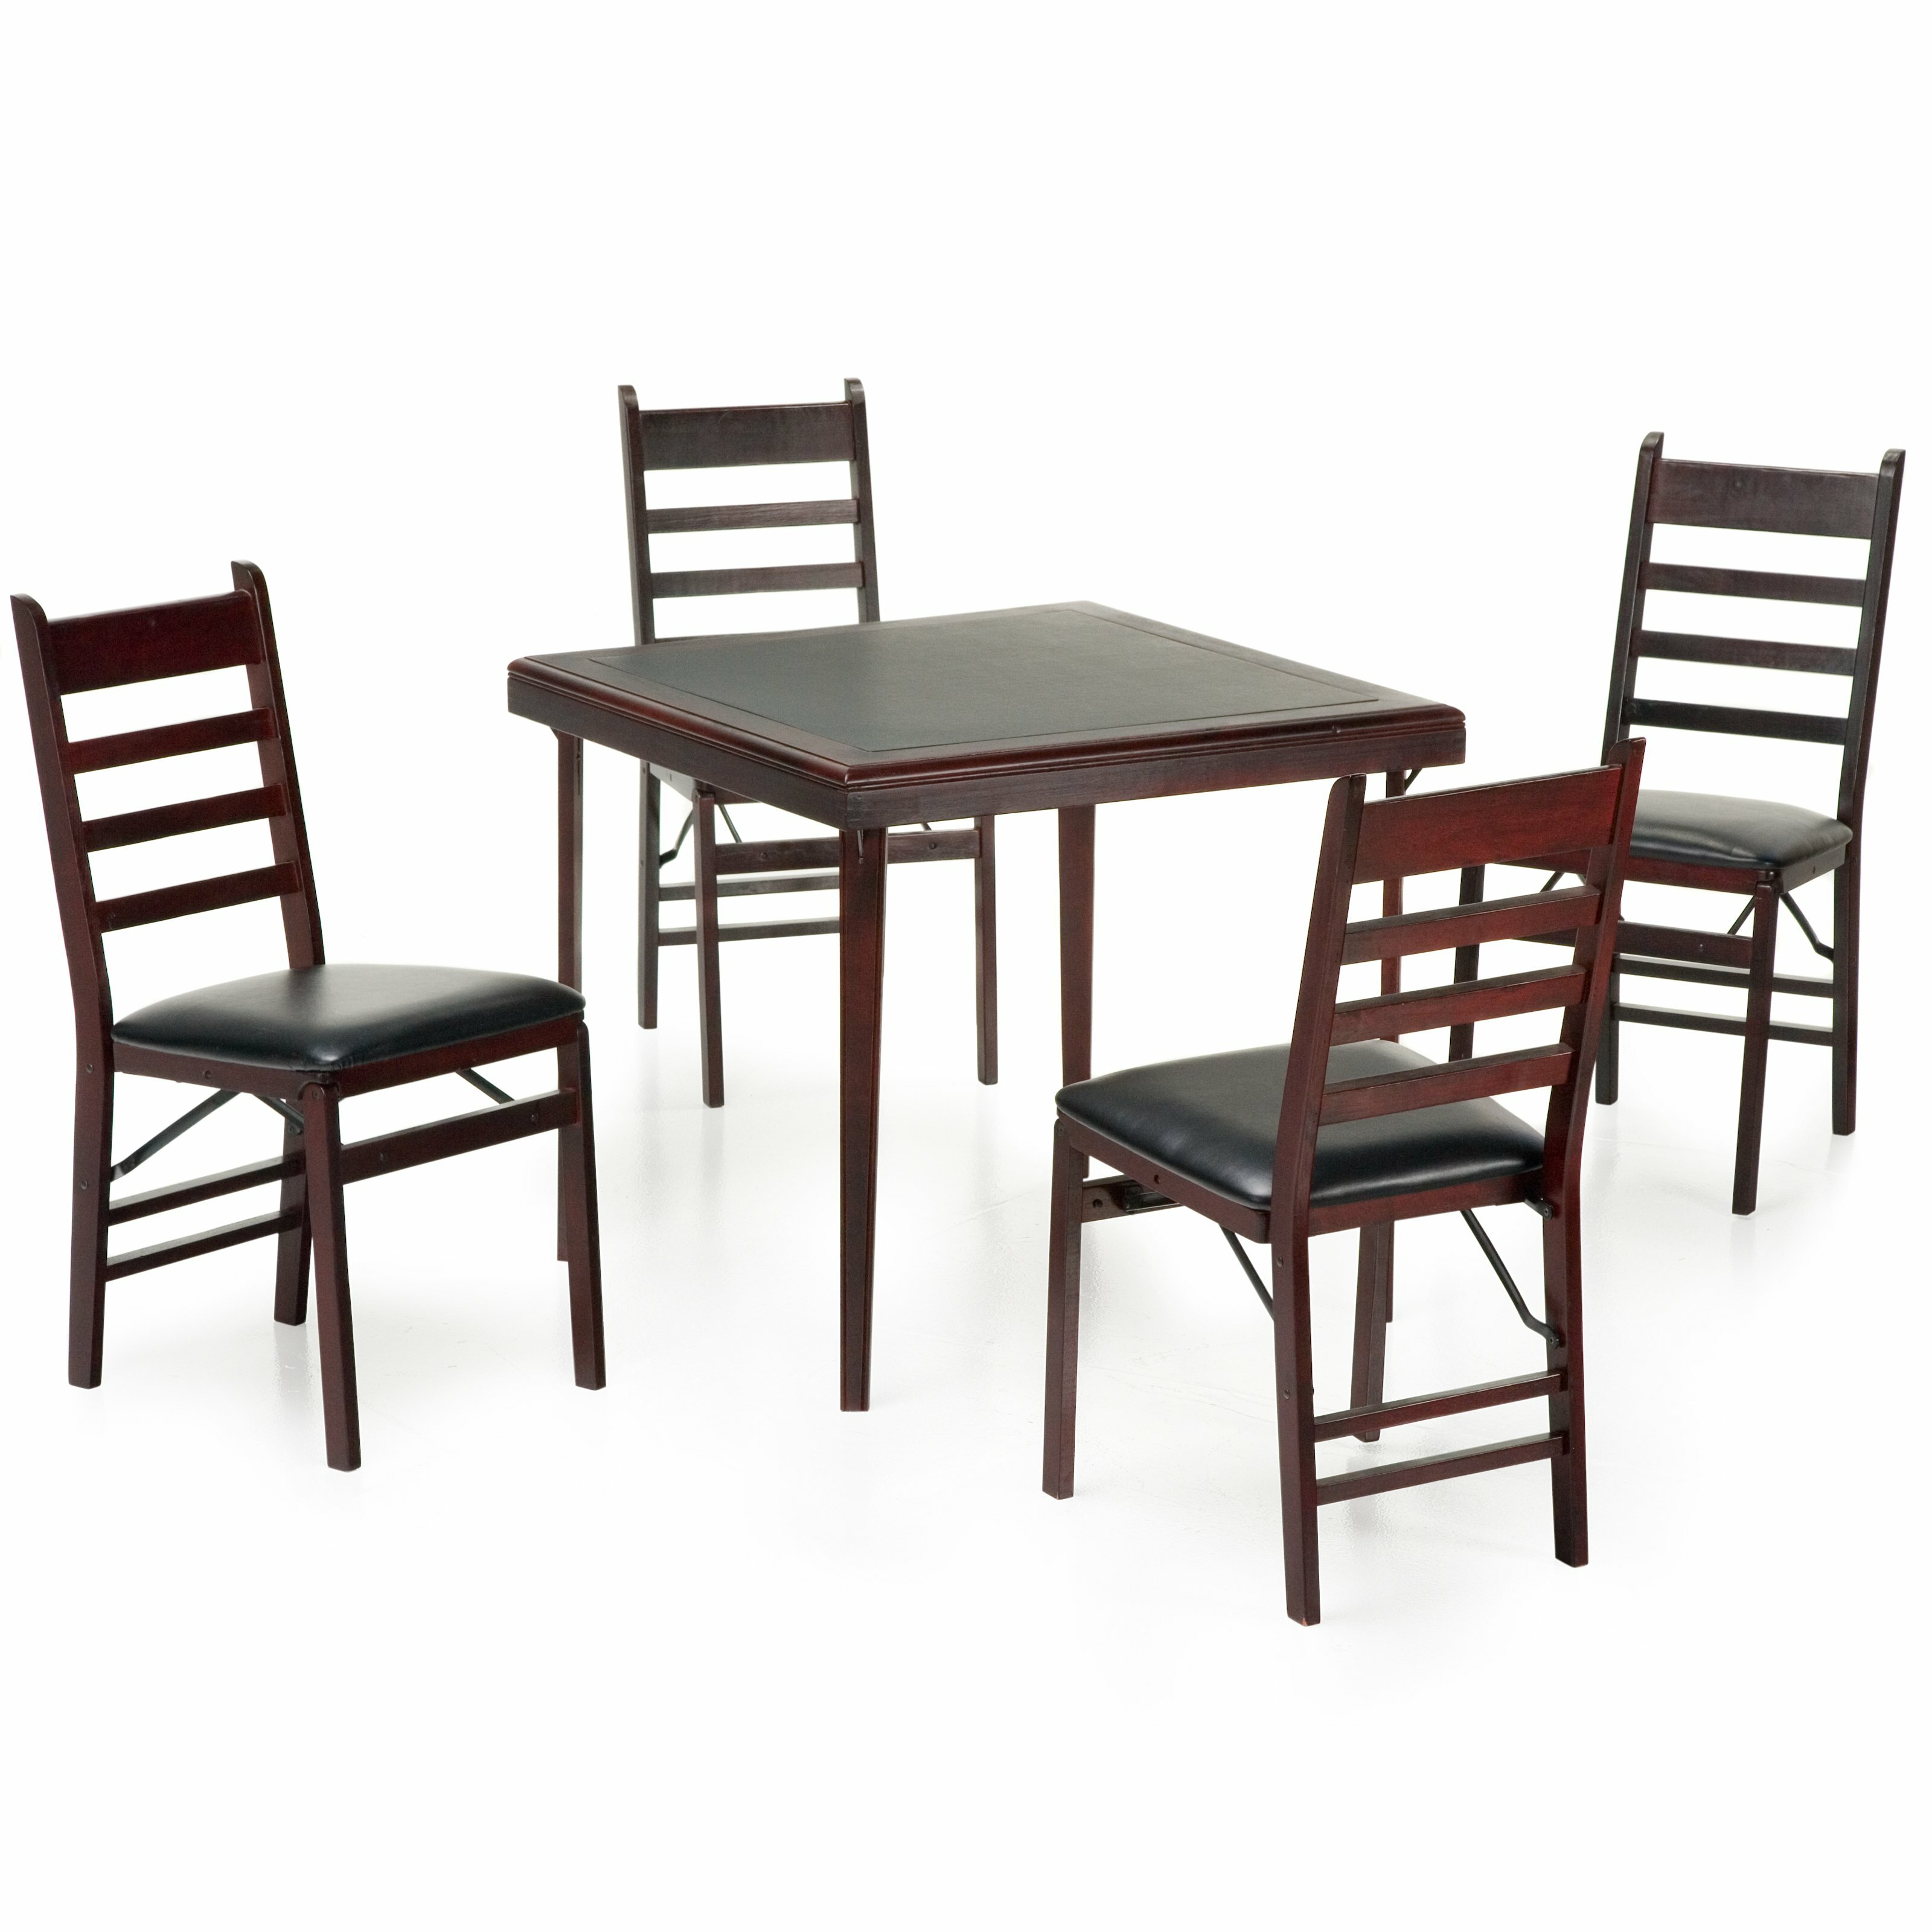 Round Folding Tables Costco | Utility Table Costco | Costco Folding Tables